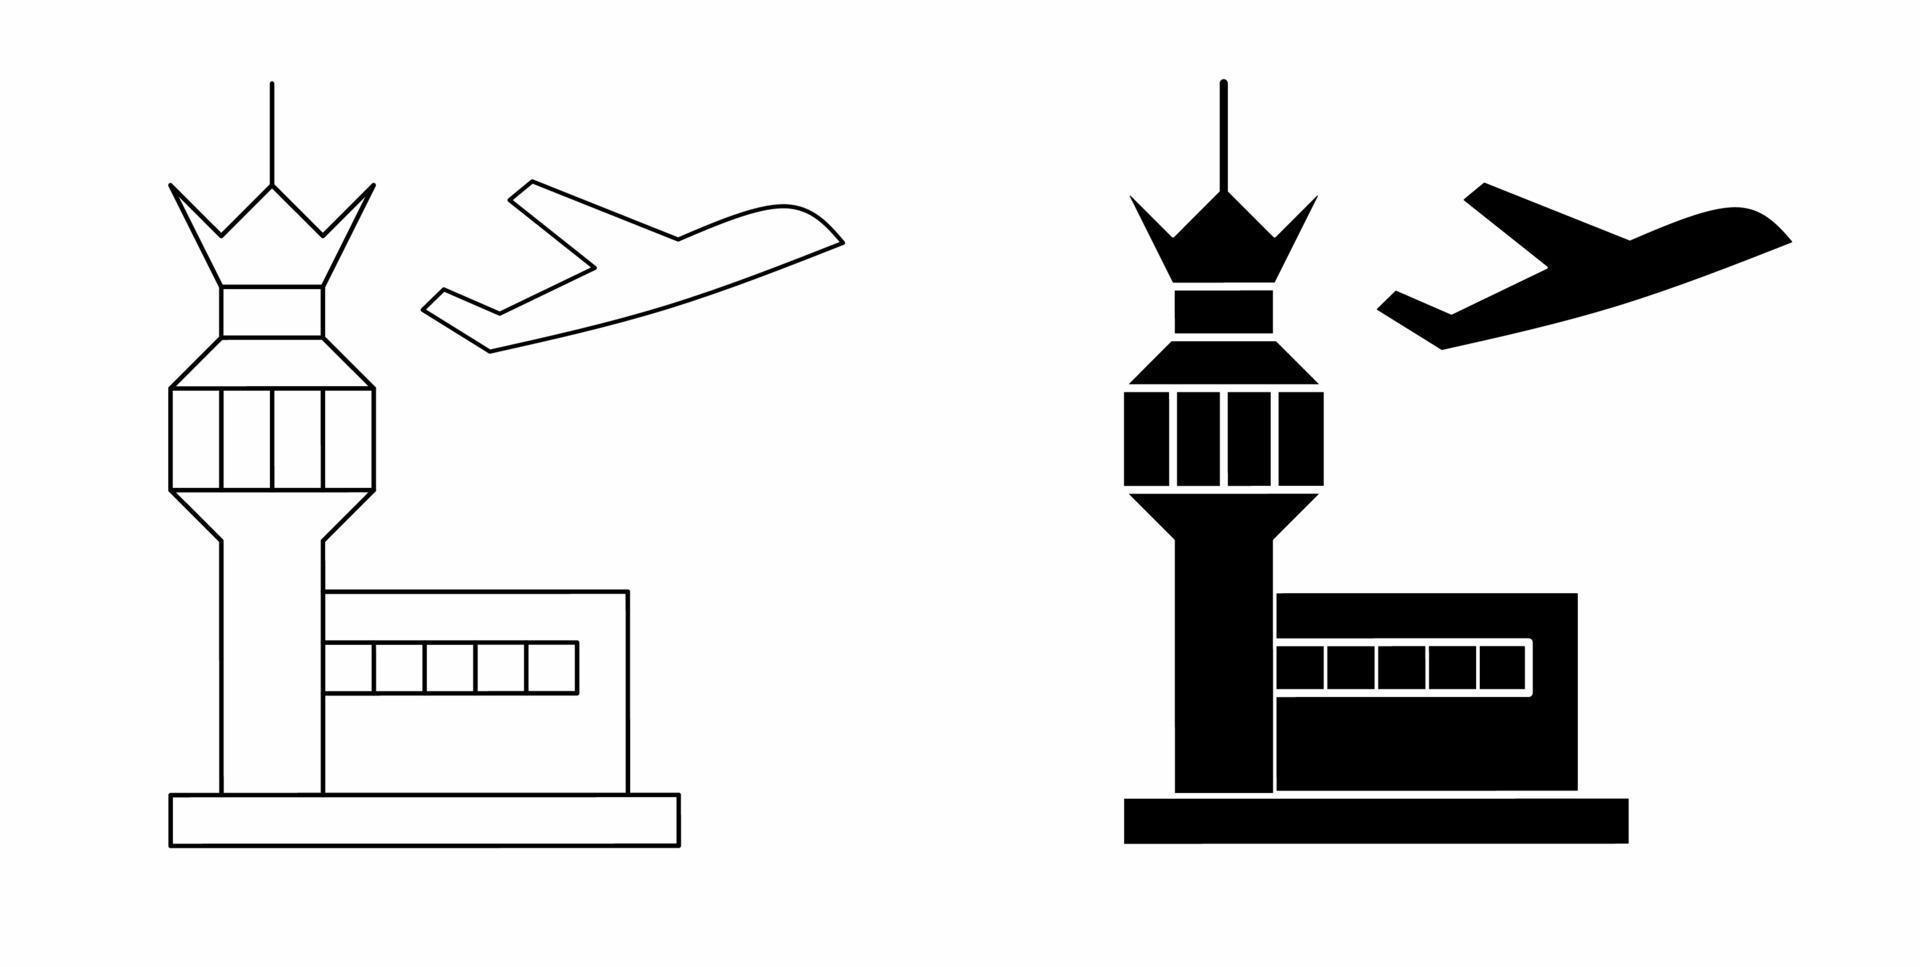 control tower airport or military base icon set isolated on white background.outline silhouette Flight control tower flat icon vector